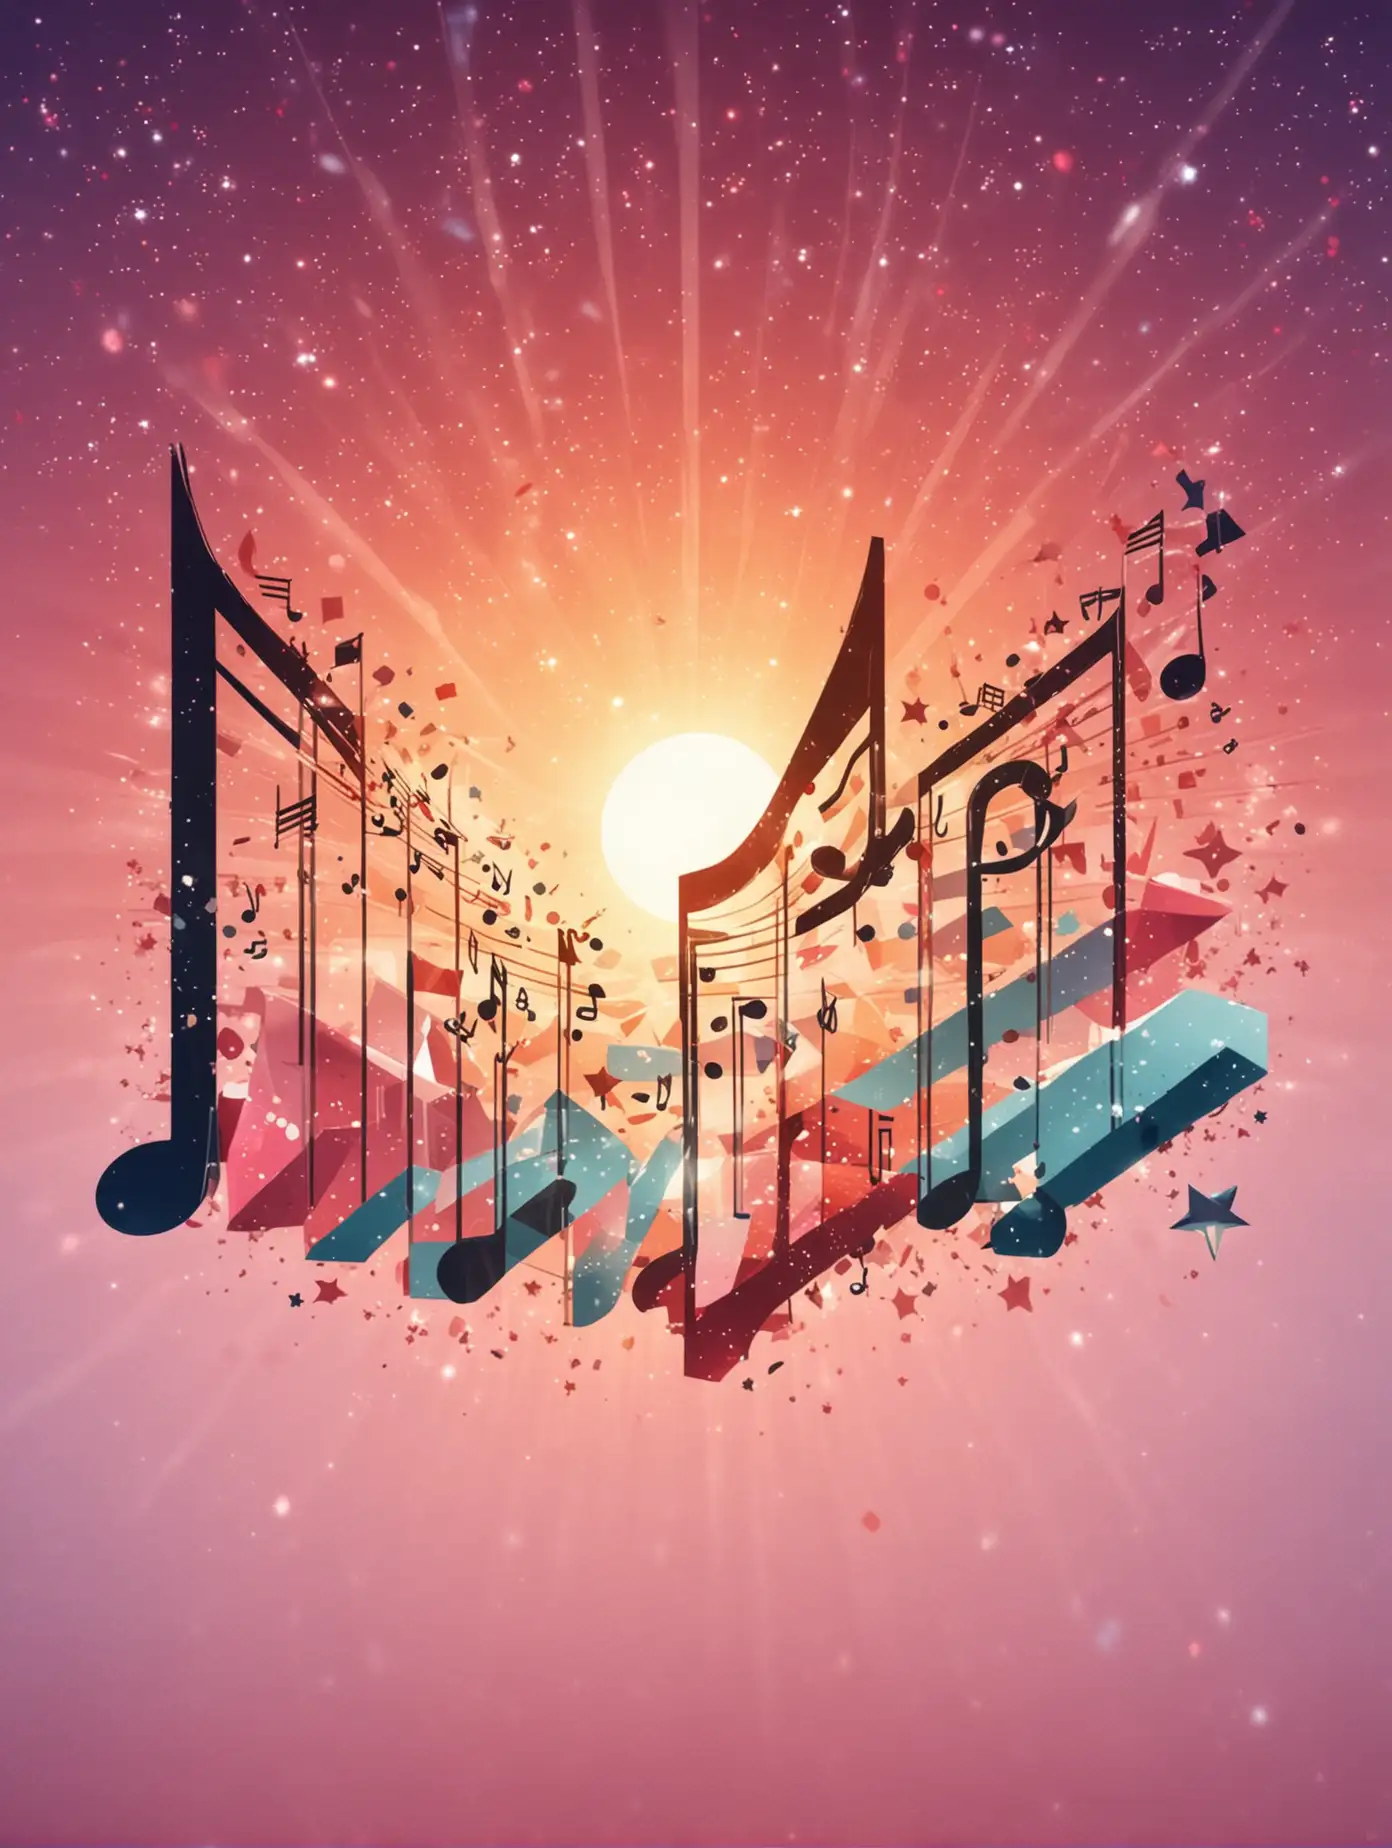 Musical Notes with Geometric Shapes on Staff in Dreamy Sunrise Background